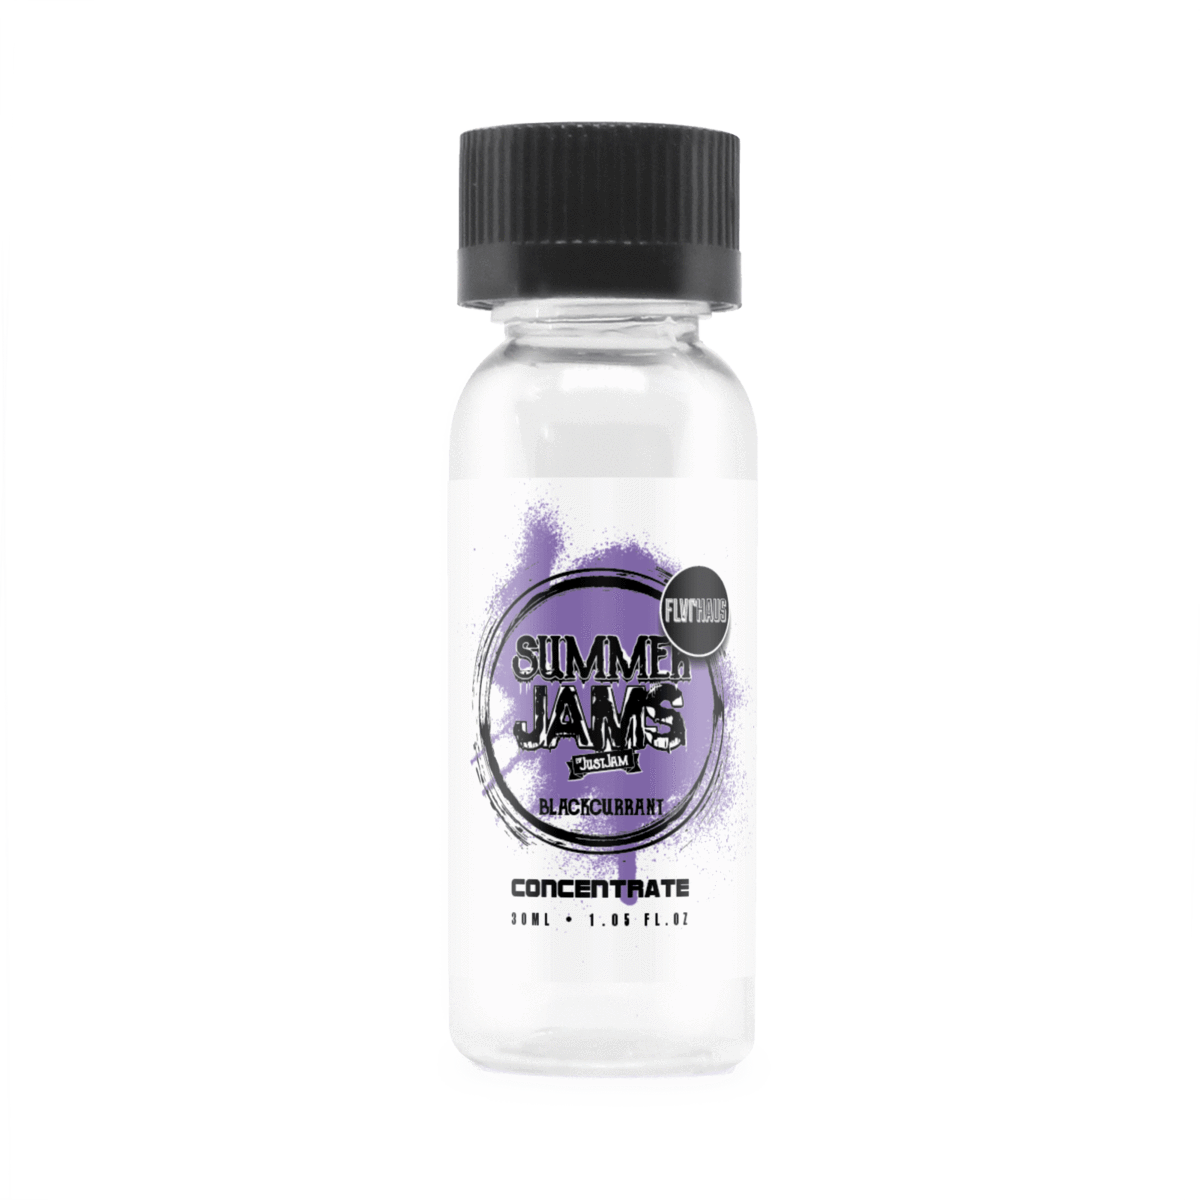 Blackcurrant Summer Concentrate E-liquid by Just Jam 30ml